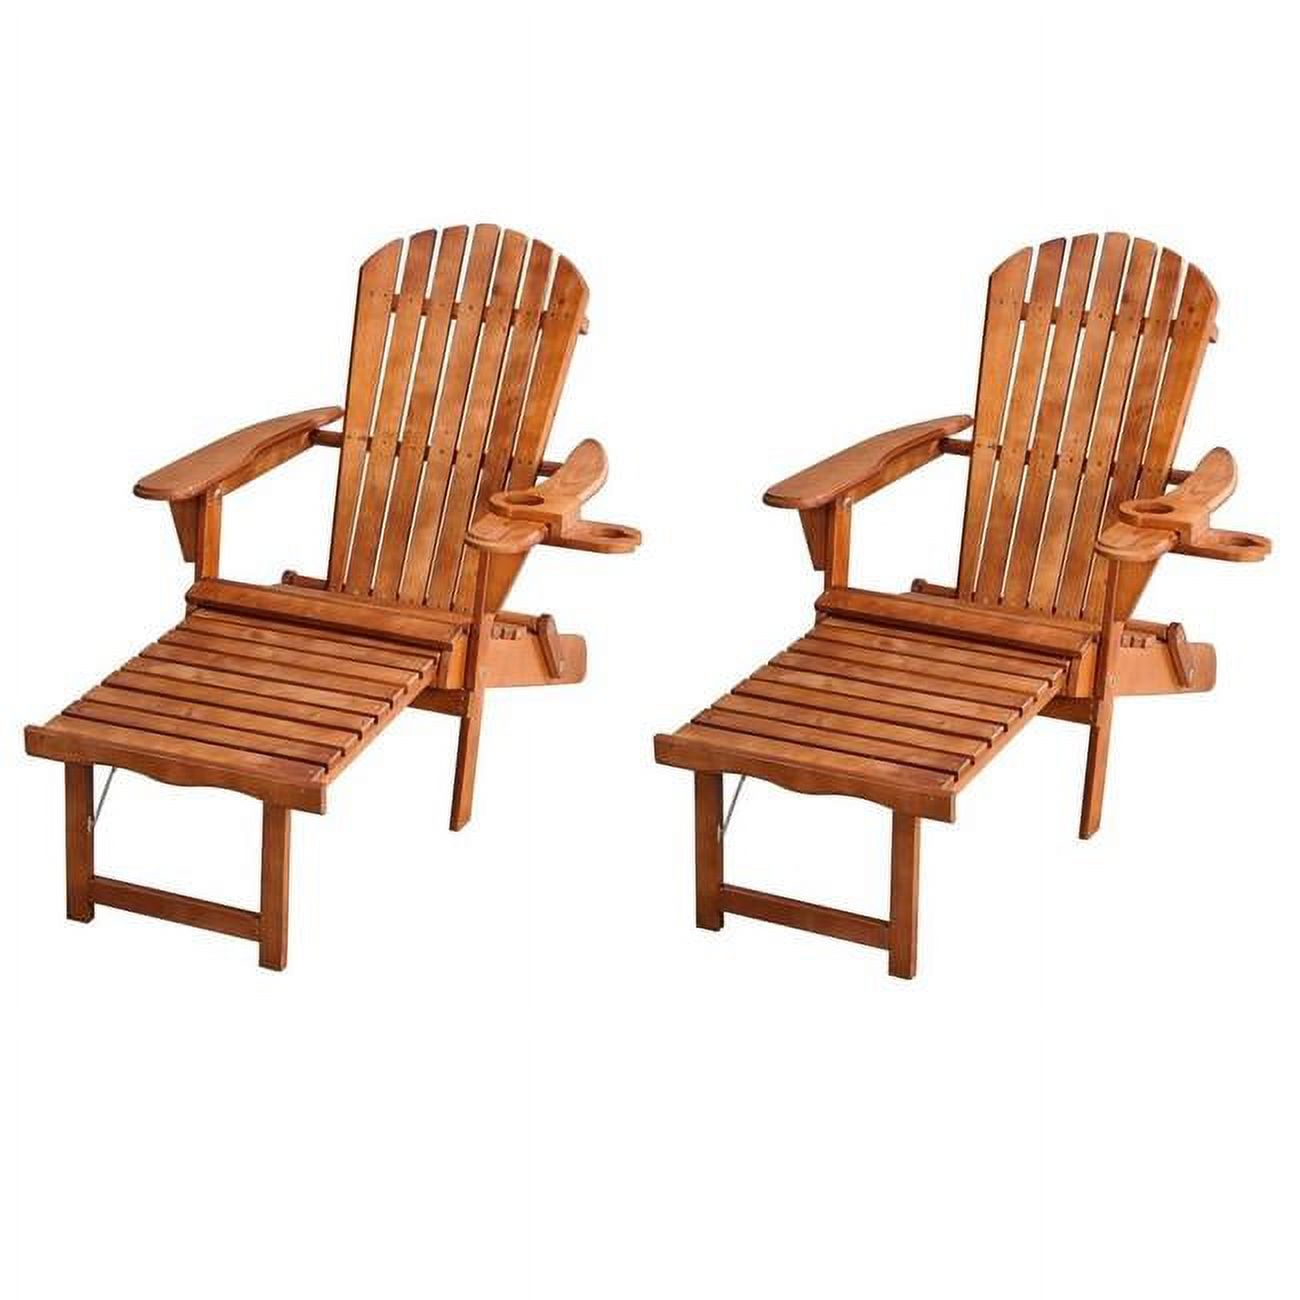 50 in. Oceanic Collection Adirondack Chaise Lounge Chair Foldable, Cup & Glass Holder, Walnut - Set of 2 - image 1 of 1